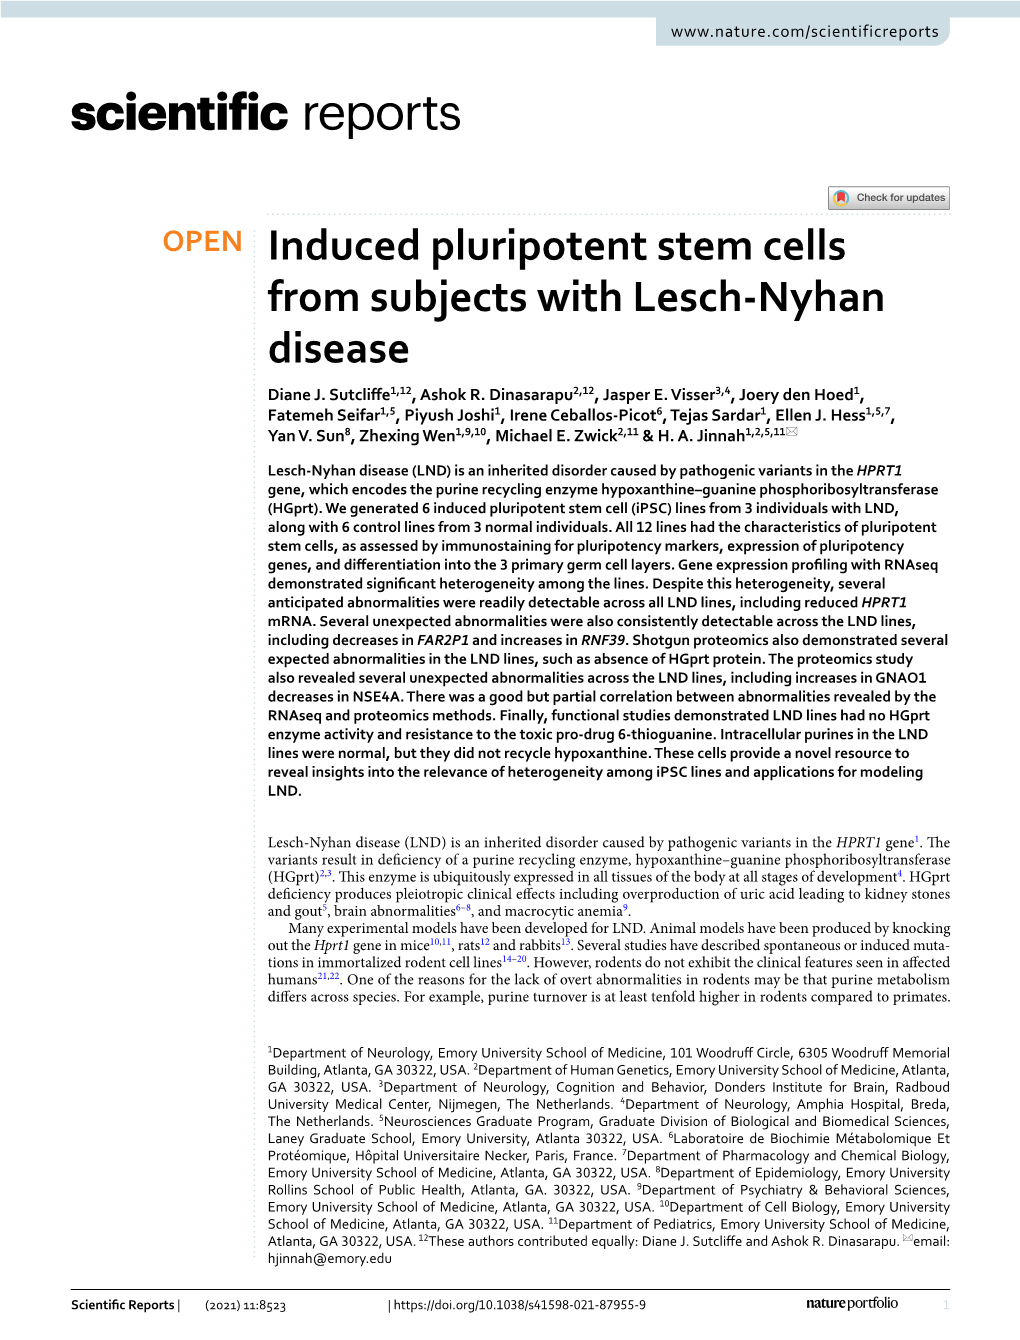 Induced Pluripotent Stem Cells from Subjects with Lesch-Nyhan Disease